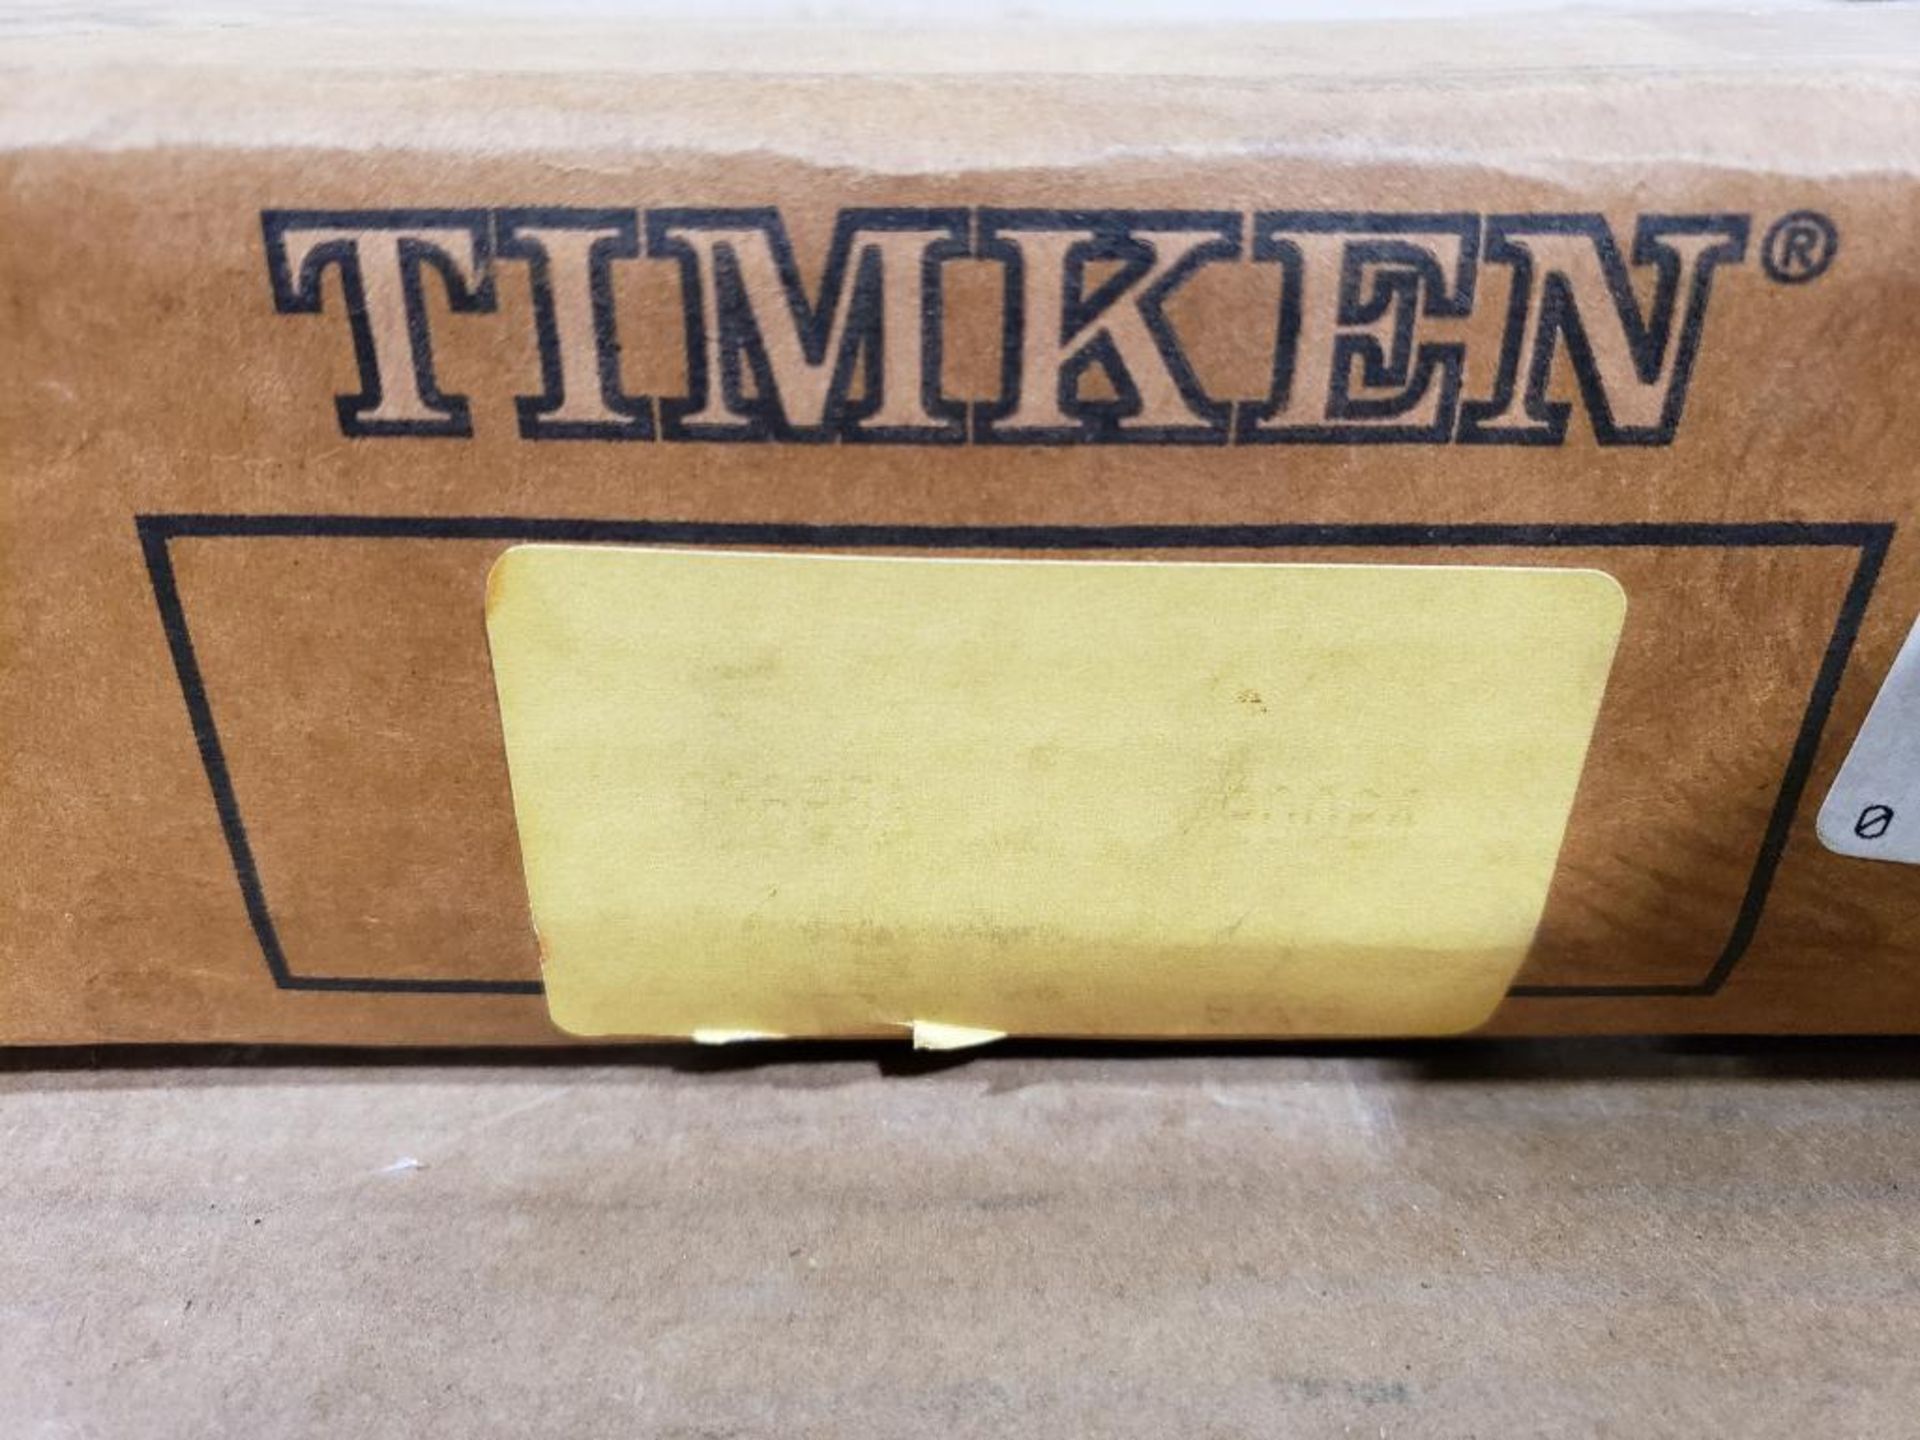 Timken bearing. Part number 93825A. - Image 3 of 4